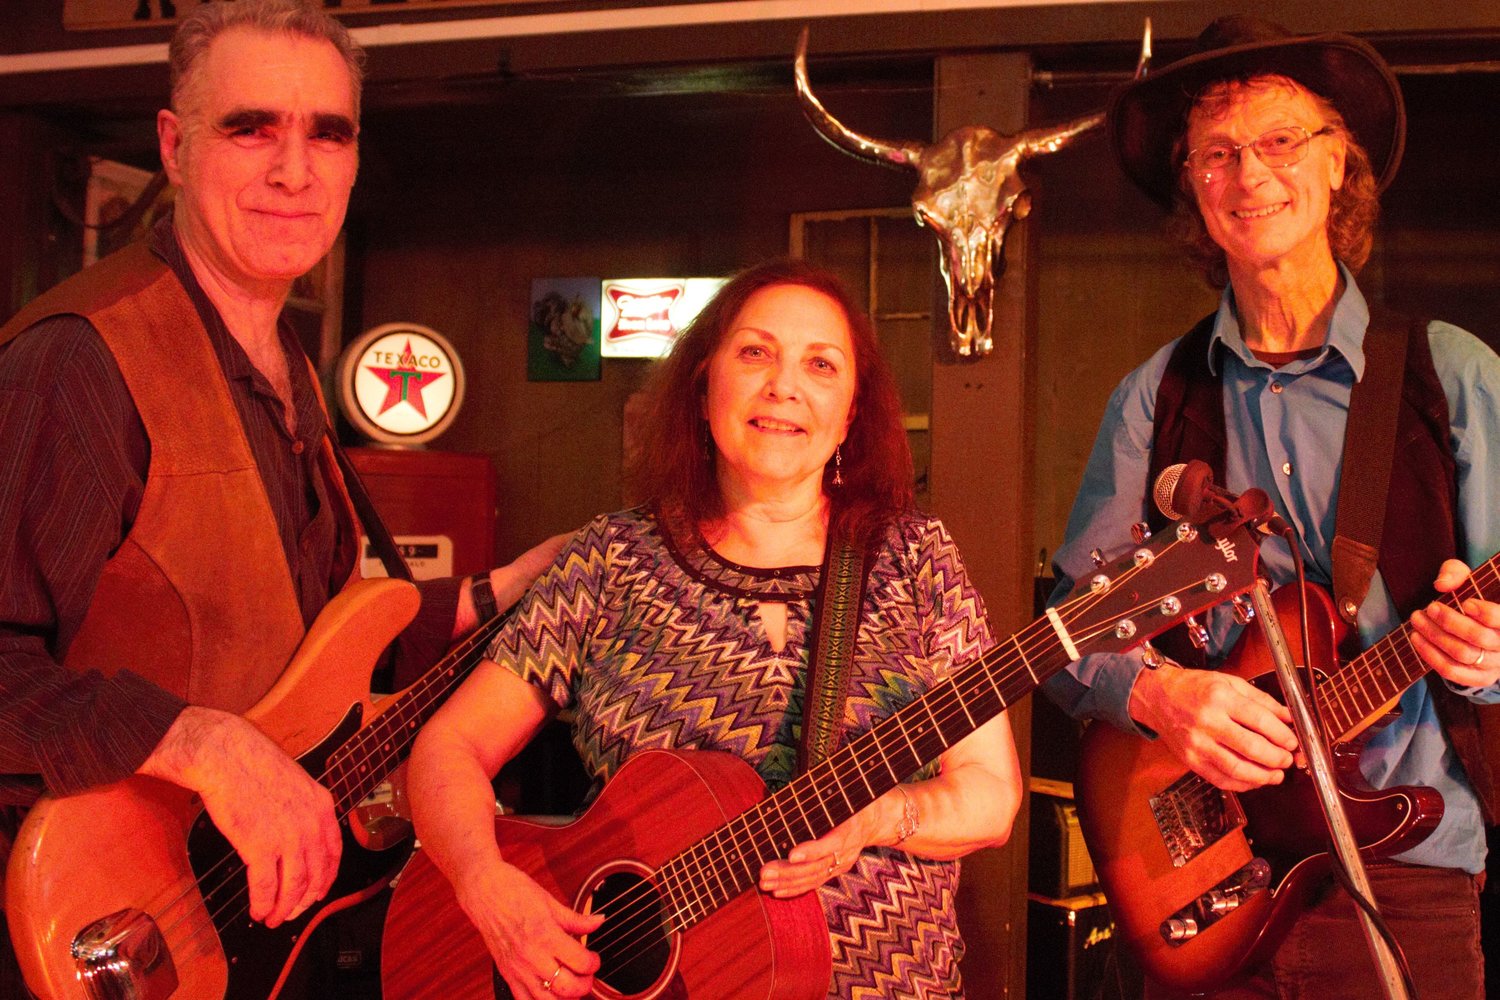 Chip Forelli, left, Rose and Randy Light will perform as Lighten Up on Saturday, May 8.